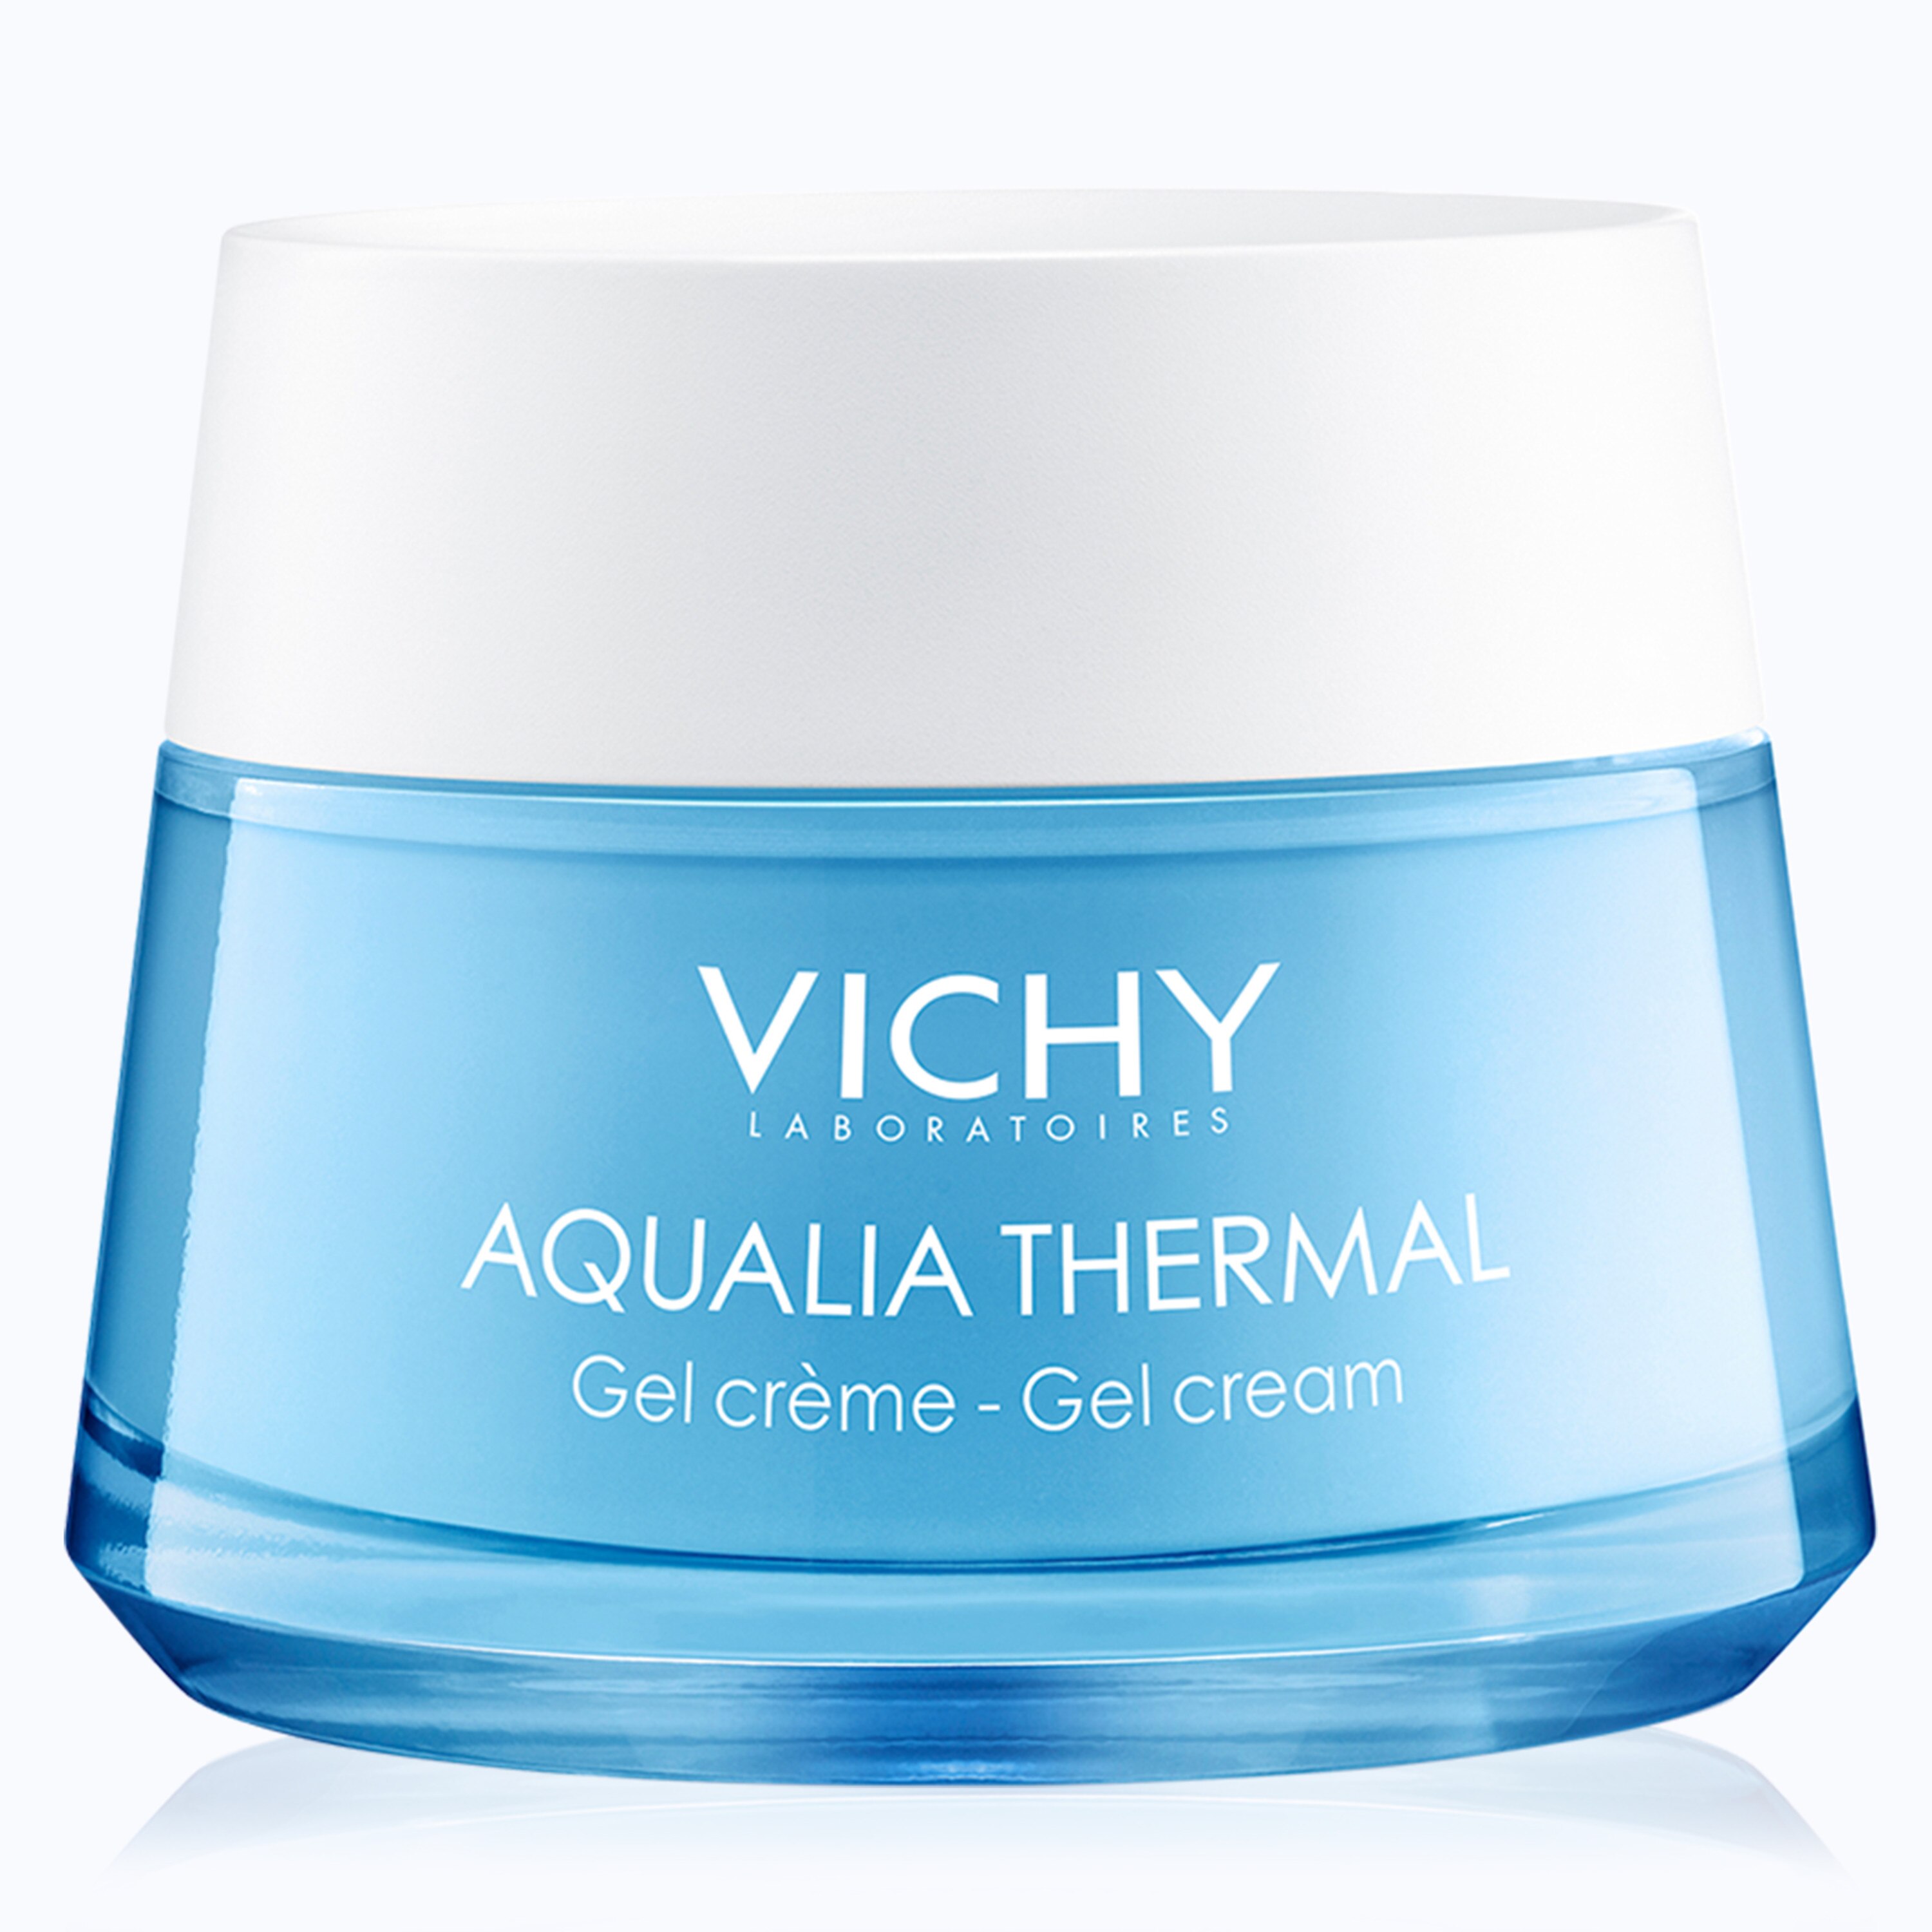 Vichy Aqualia Thermal Hydrating Mineral Water Gel Face Moisturizer